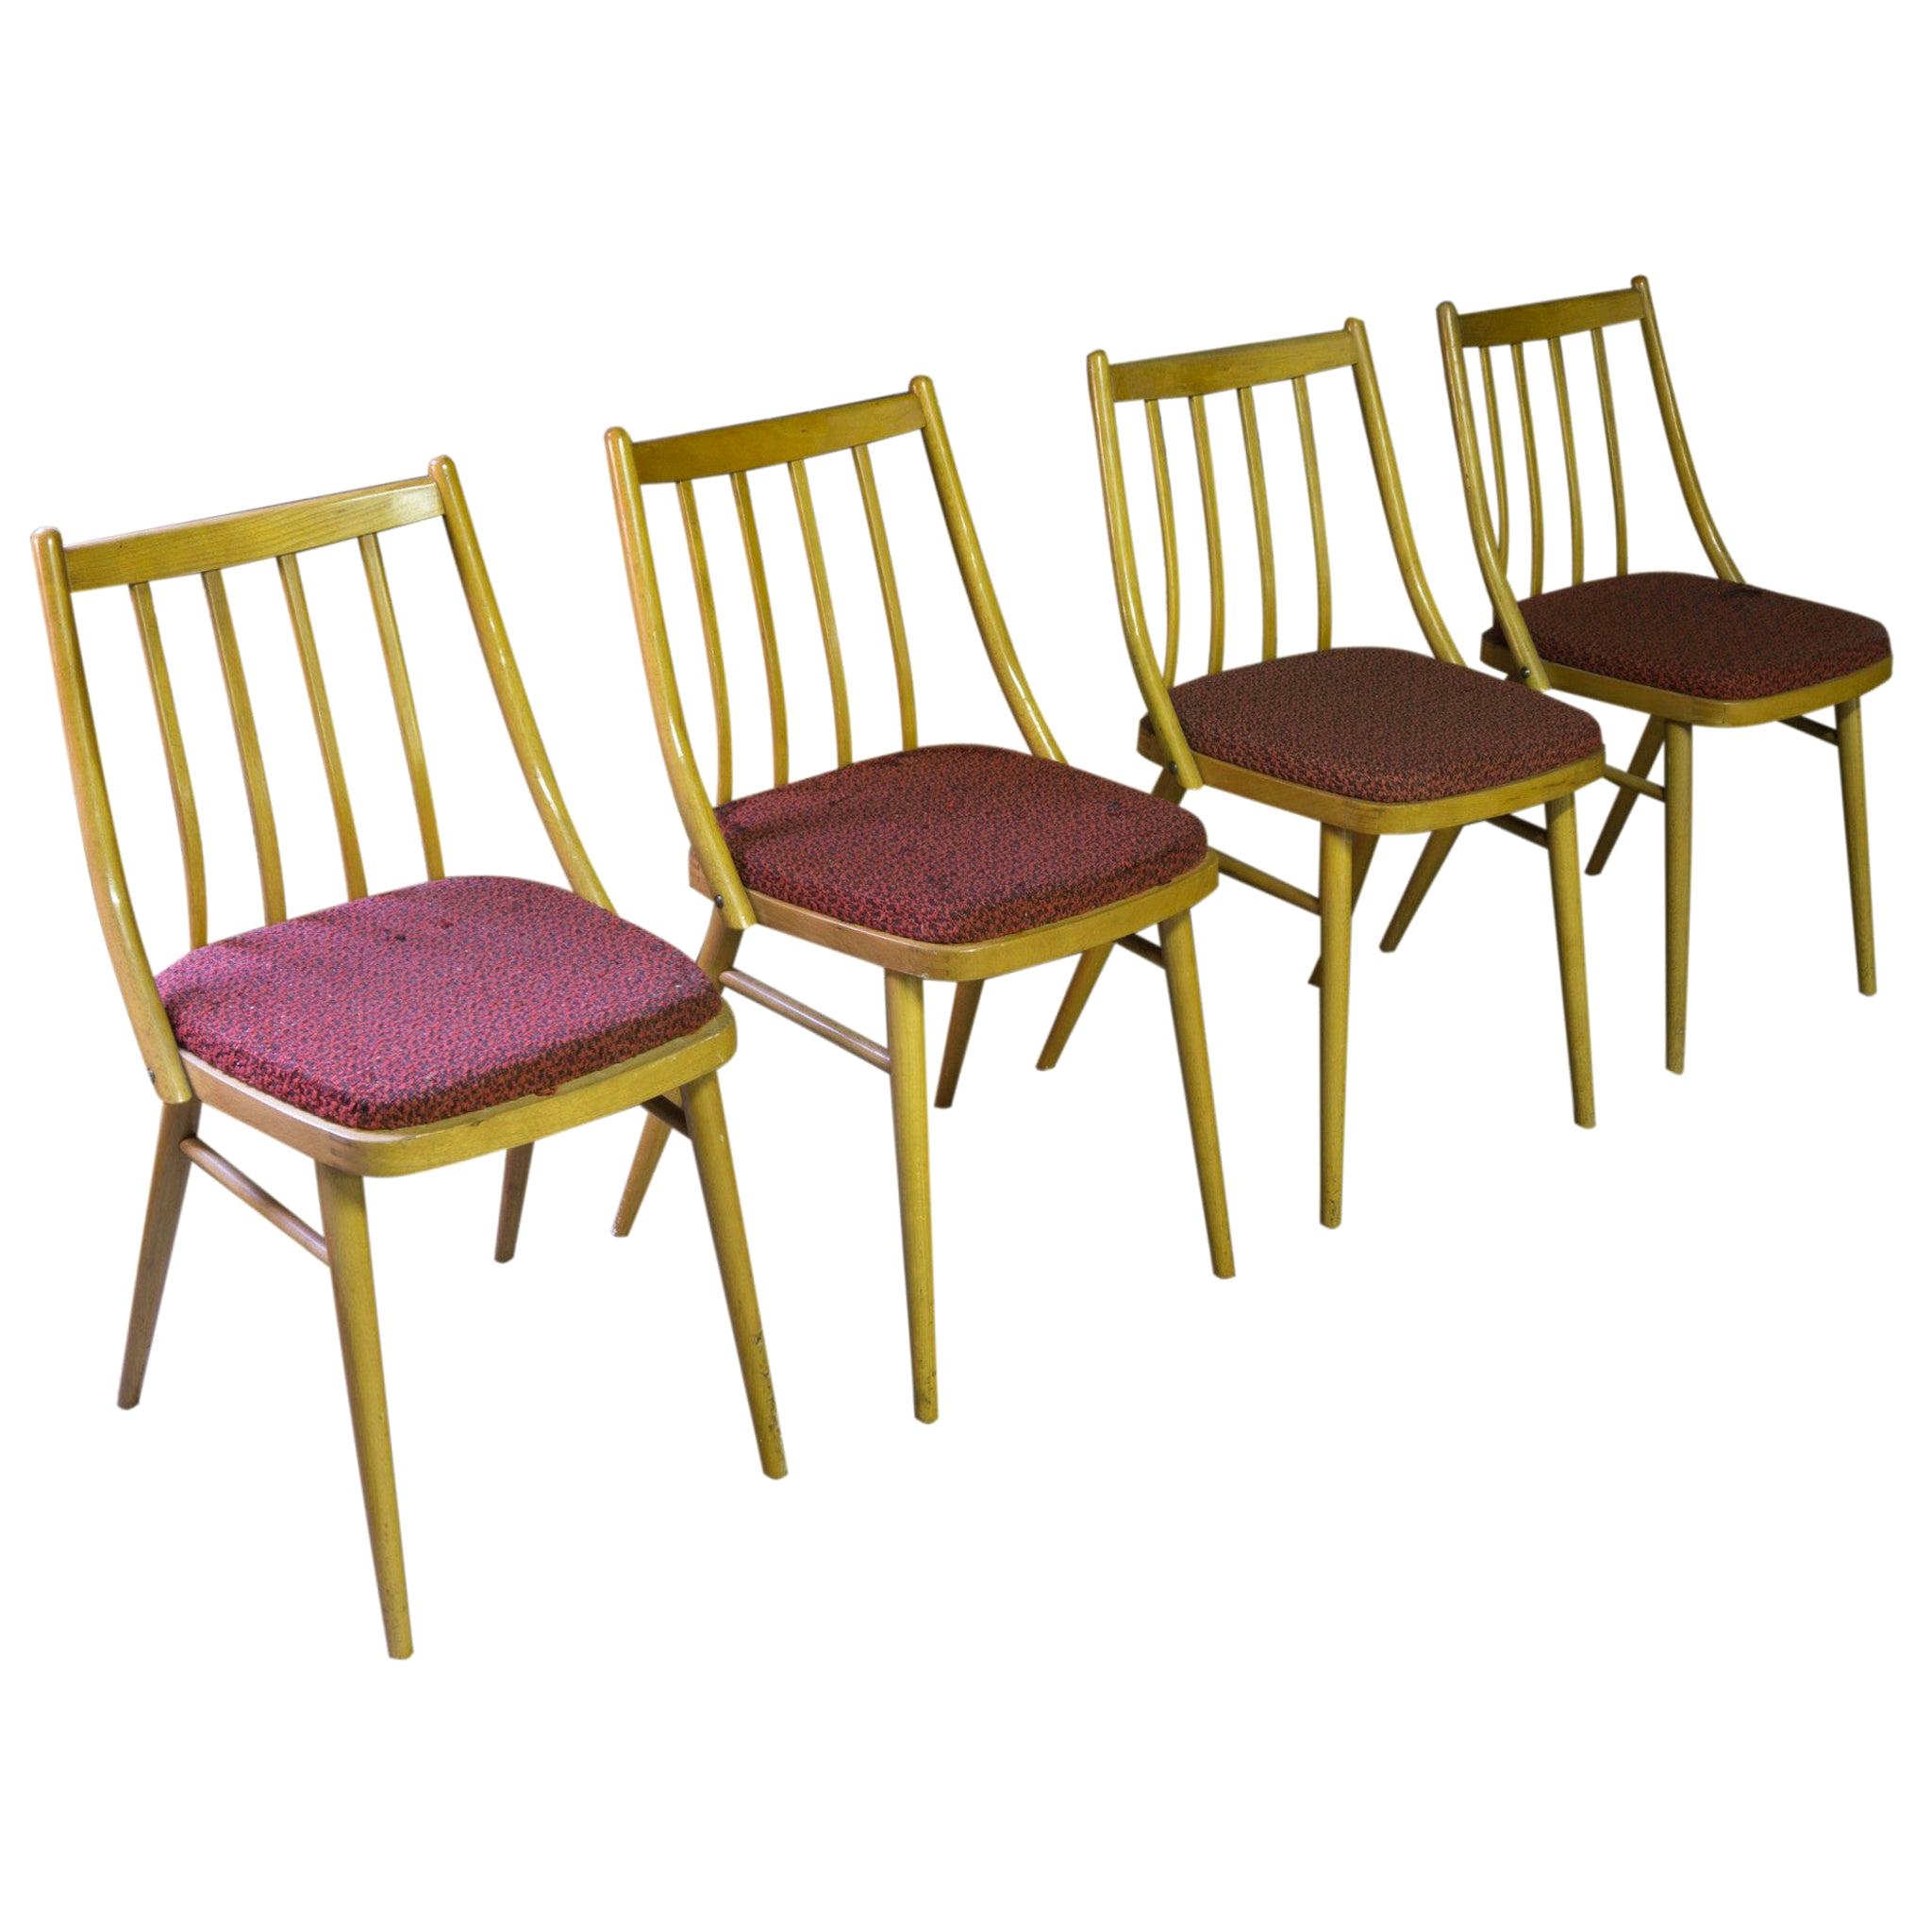 Set of Four Vintage Dining Chairs, TON, 1960s, Czechoslovakia